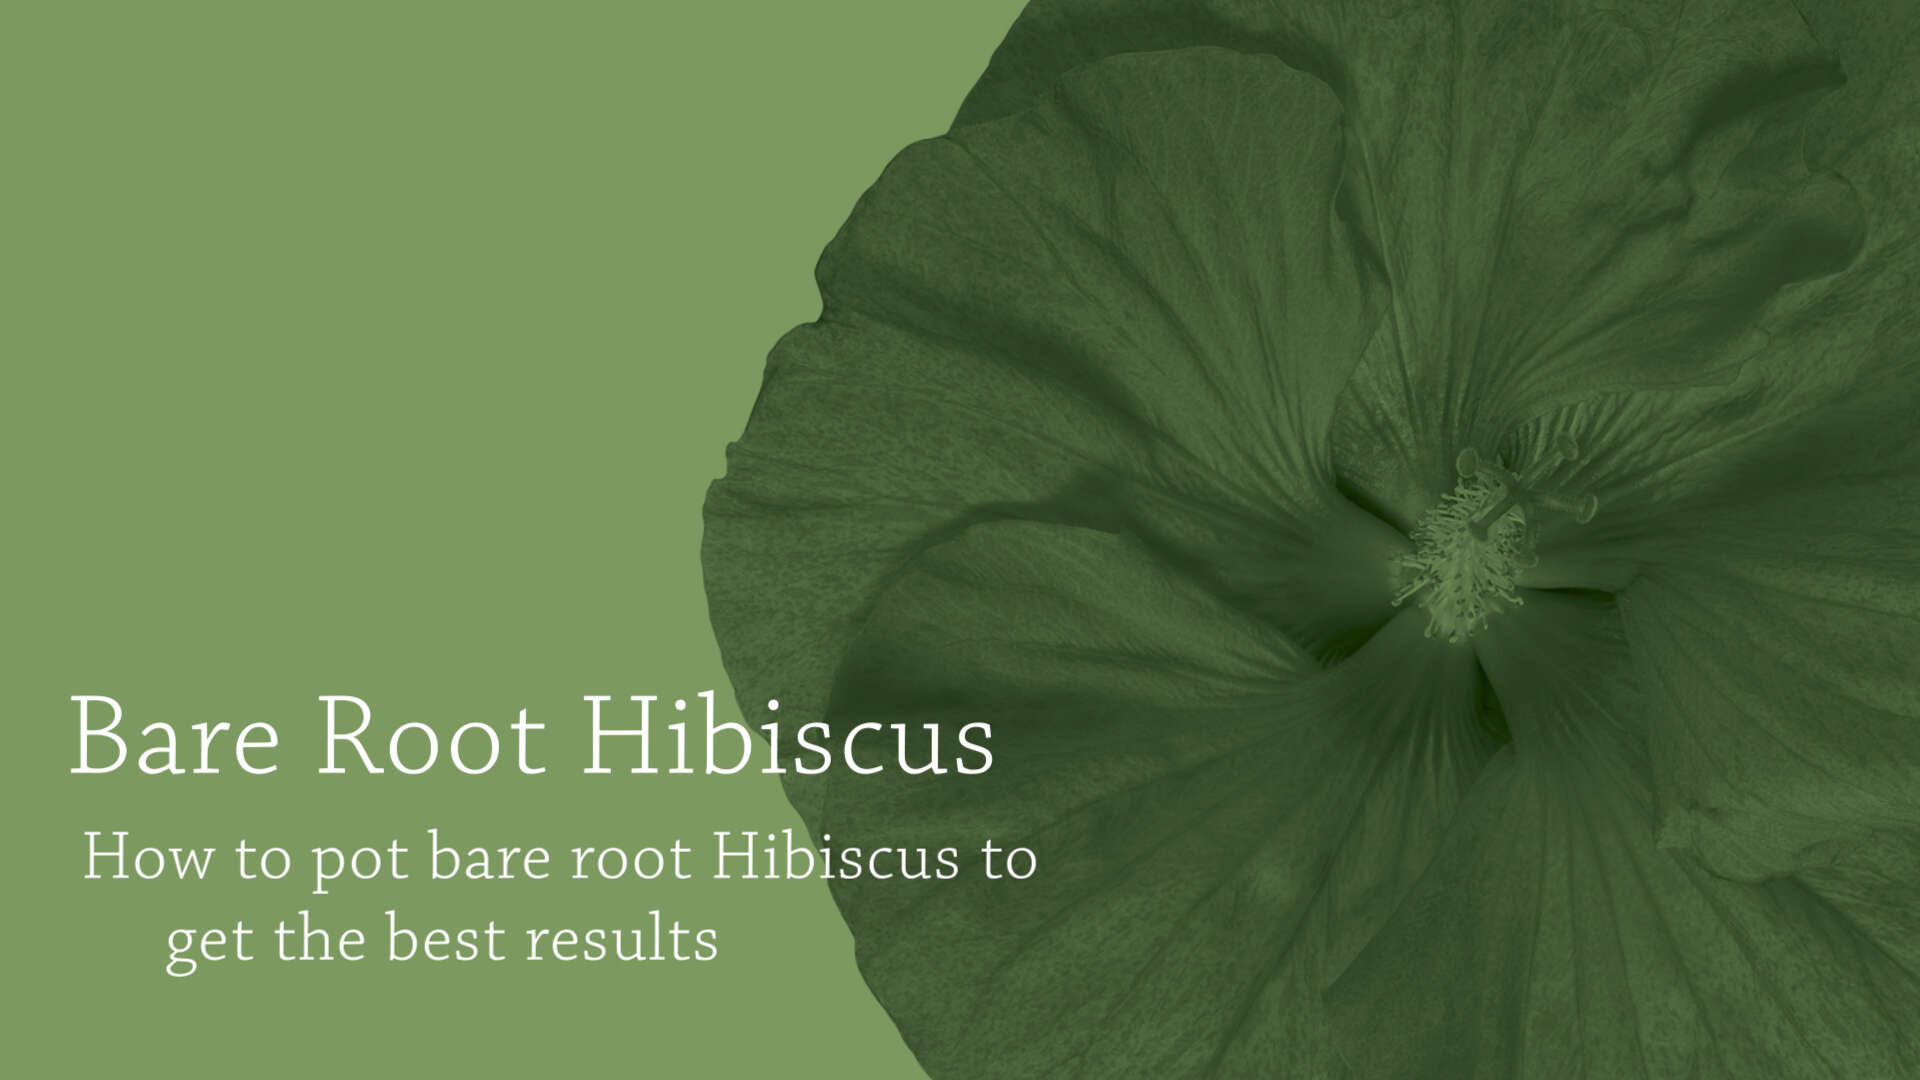 Bare Root Hibiscus Potting Tips